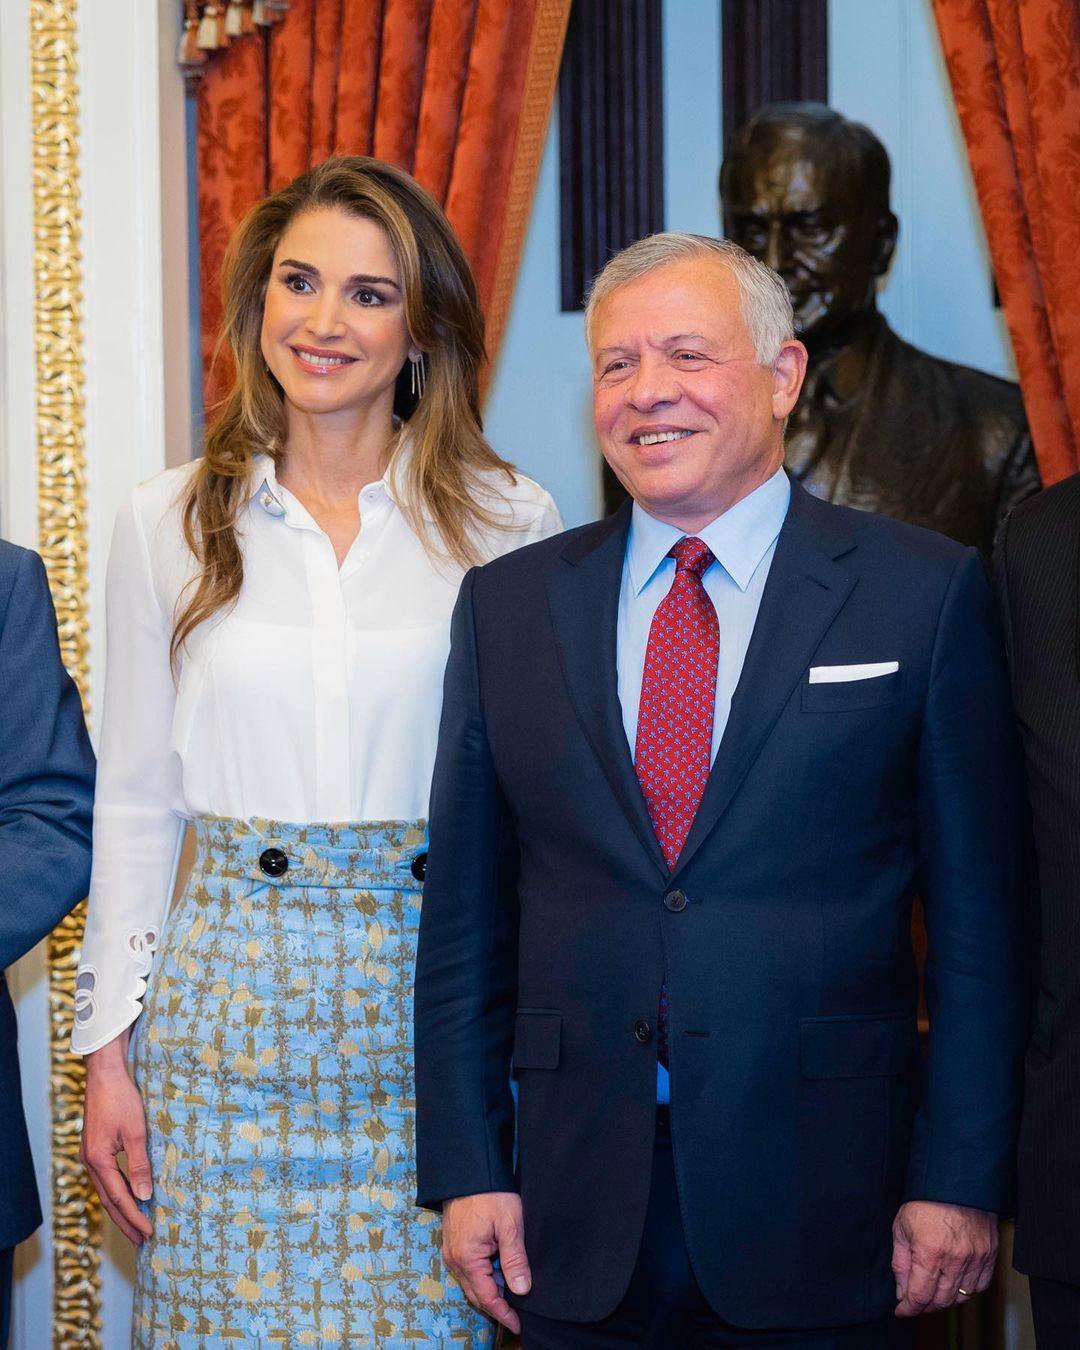 For the second outfit in the USA, Queen Rania wore white Fendi open-back Silk Crepe de Chine shirt with Dior Checkered skirt, Dior Promenade Calfskin Nubuck Pouch and Jennifer Chamandi Lorenzo suede pumps